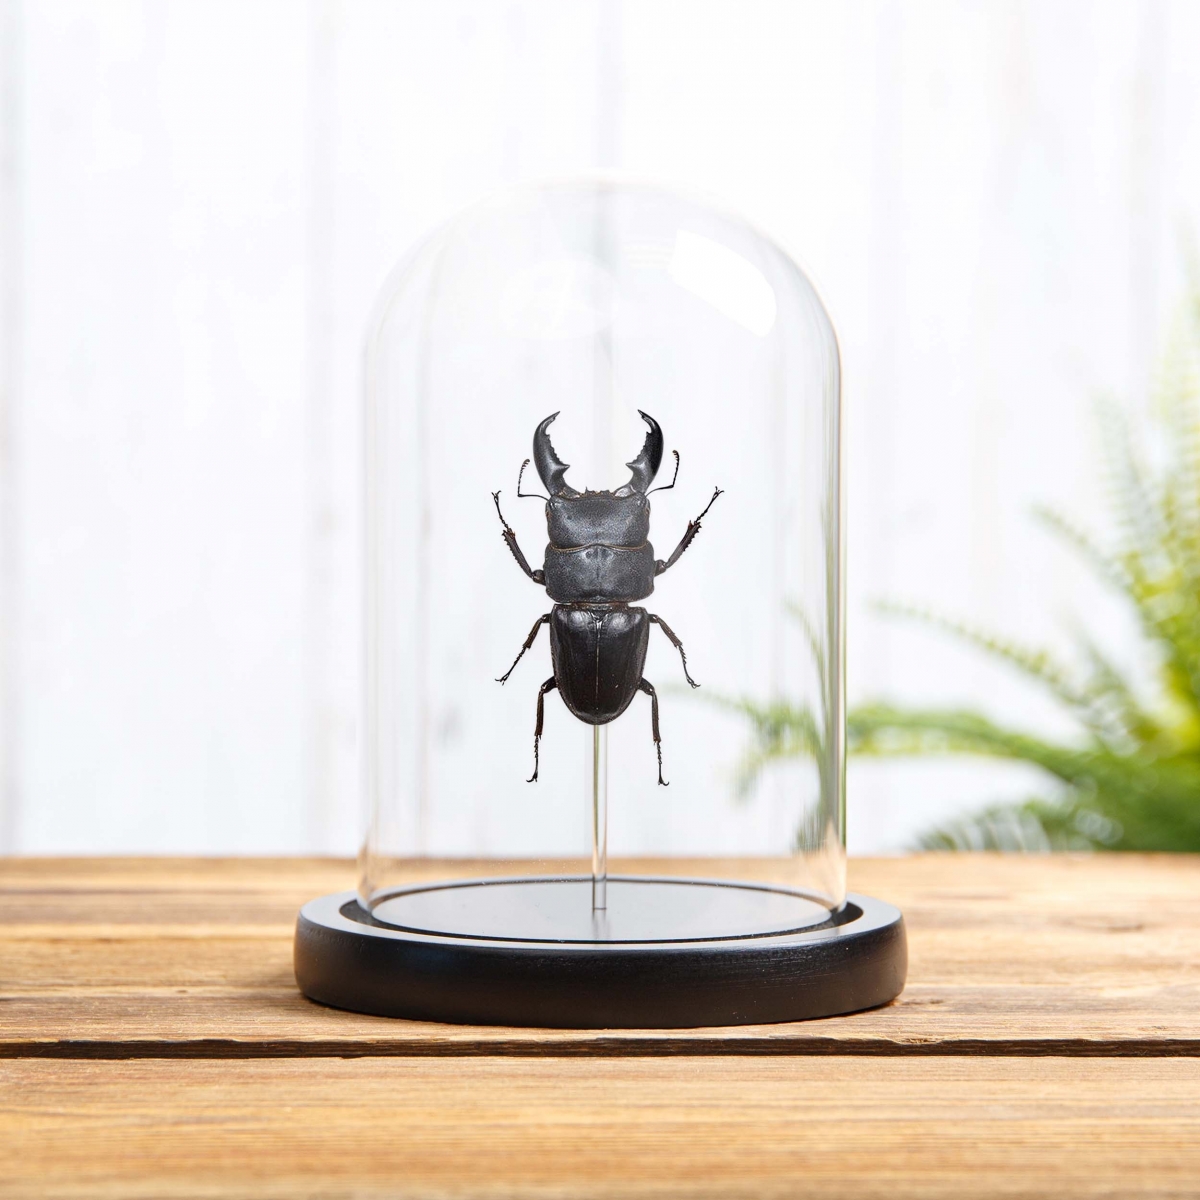 Minibeast Giant Stag Beetle in Glass Dome with Wooden Base (Dorcus titanus)